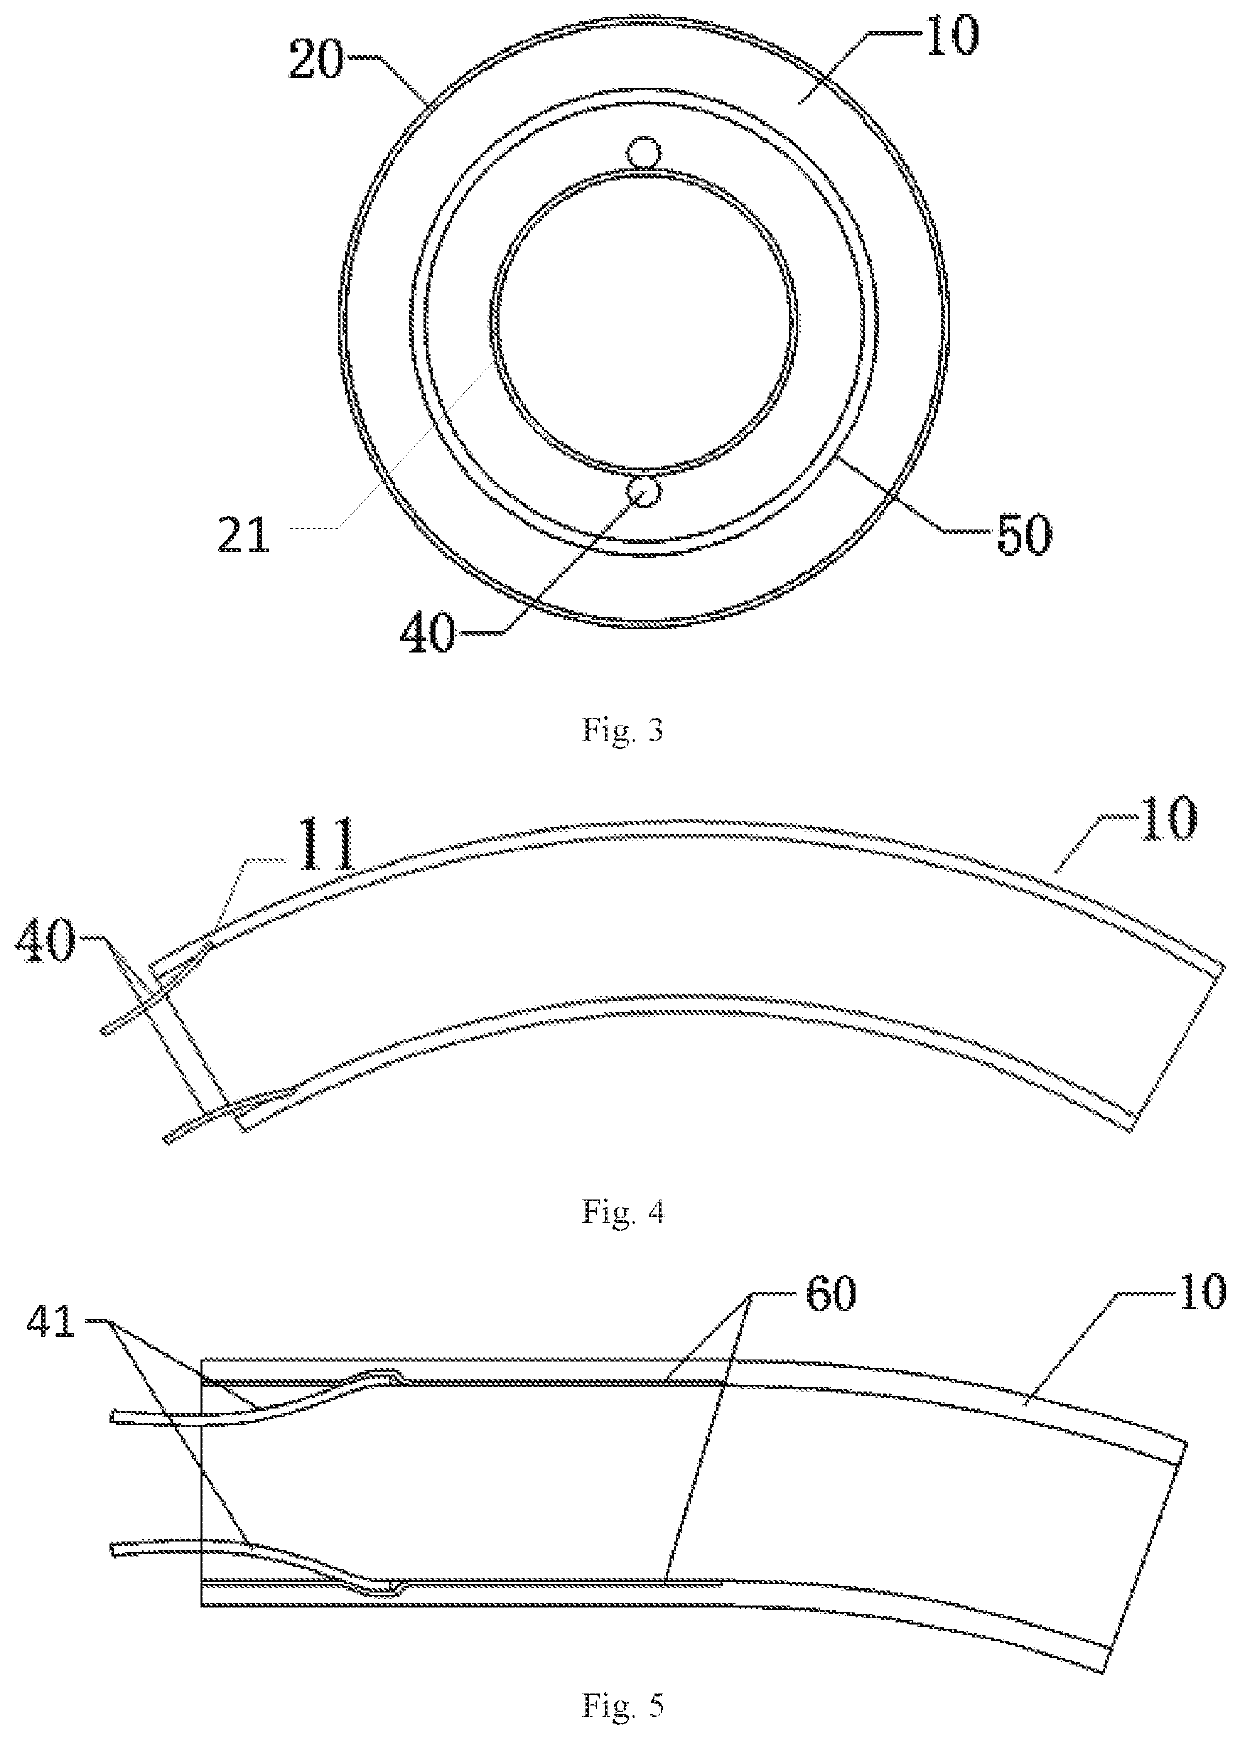 Sponge-based variable-stiffness support structure for natural orifice surgical instrument and method for using the same